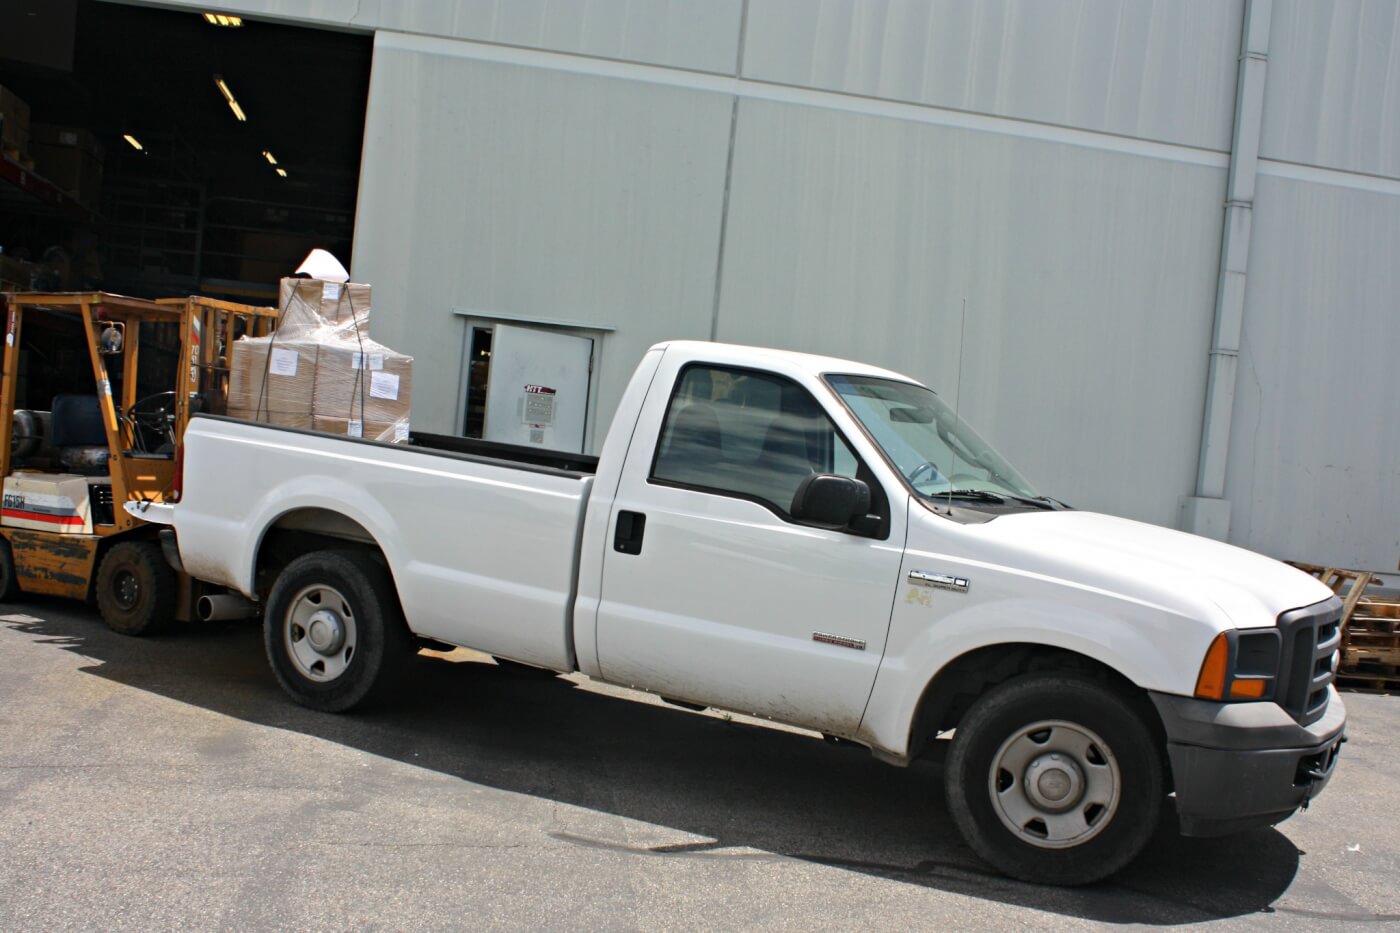 While it may not be much to look at, this 2005 6.0L Power Stroke makes for a great company parts truck that can haul just about whatever is needed in the bed or tow a heavy load down the highway. Over the course of the next few issues, this 2wd XL work truck will become the ultimate performance-oriented reliable workhorse.